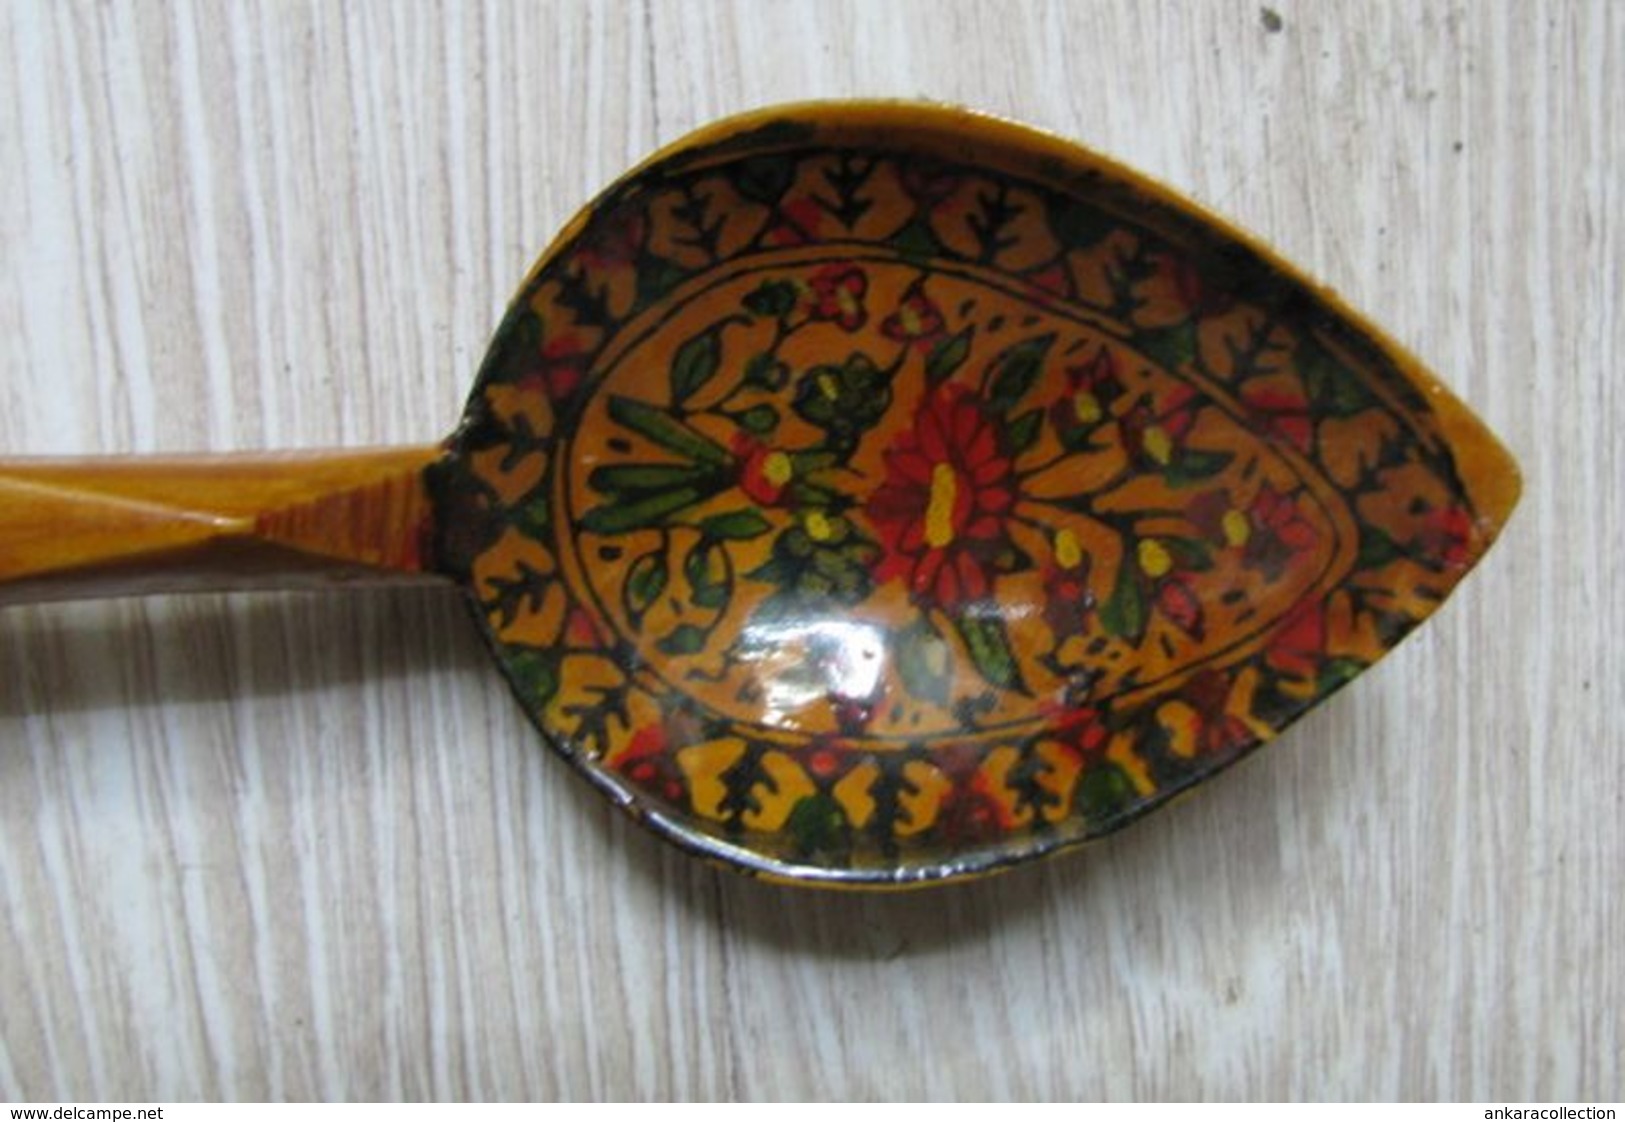 AC - WOODEN SPOON HAND MADE  & PAINTED 1970s FROM TURKEY - Spoons